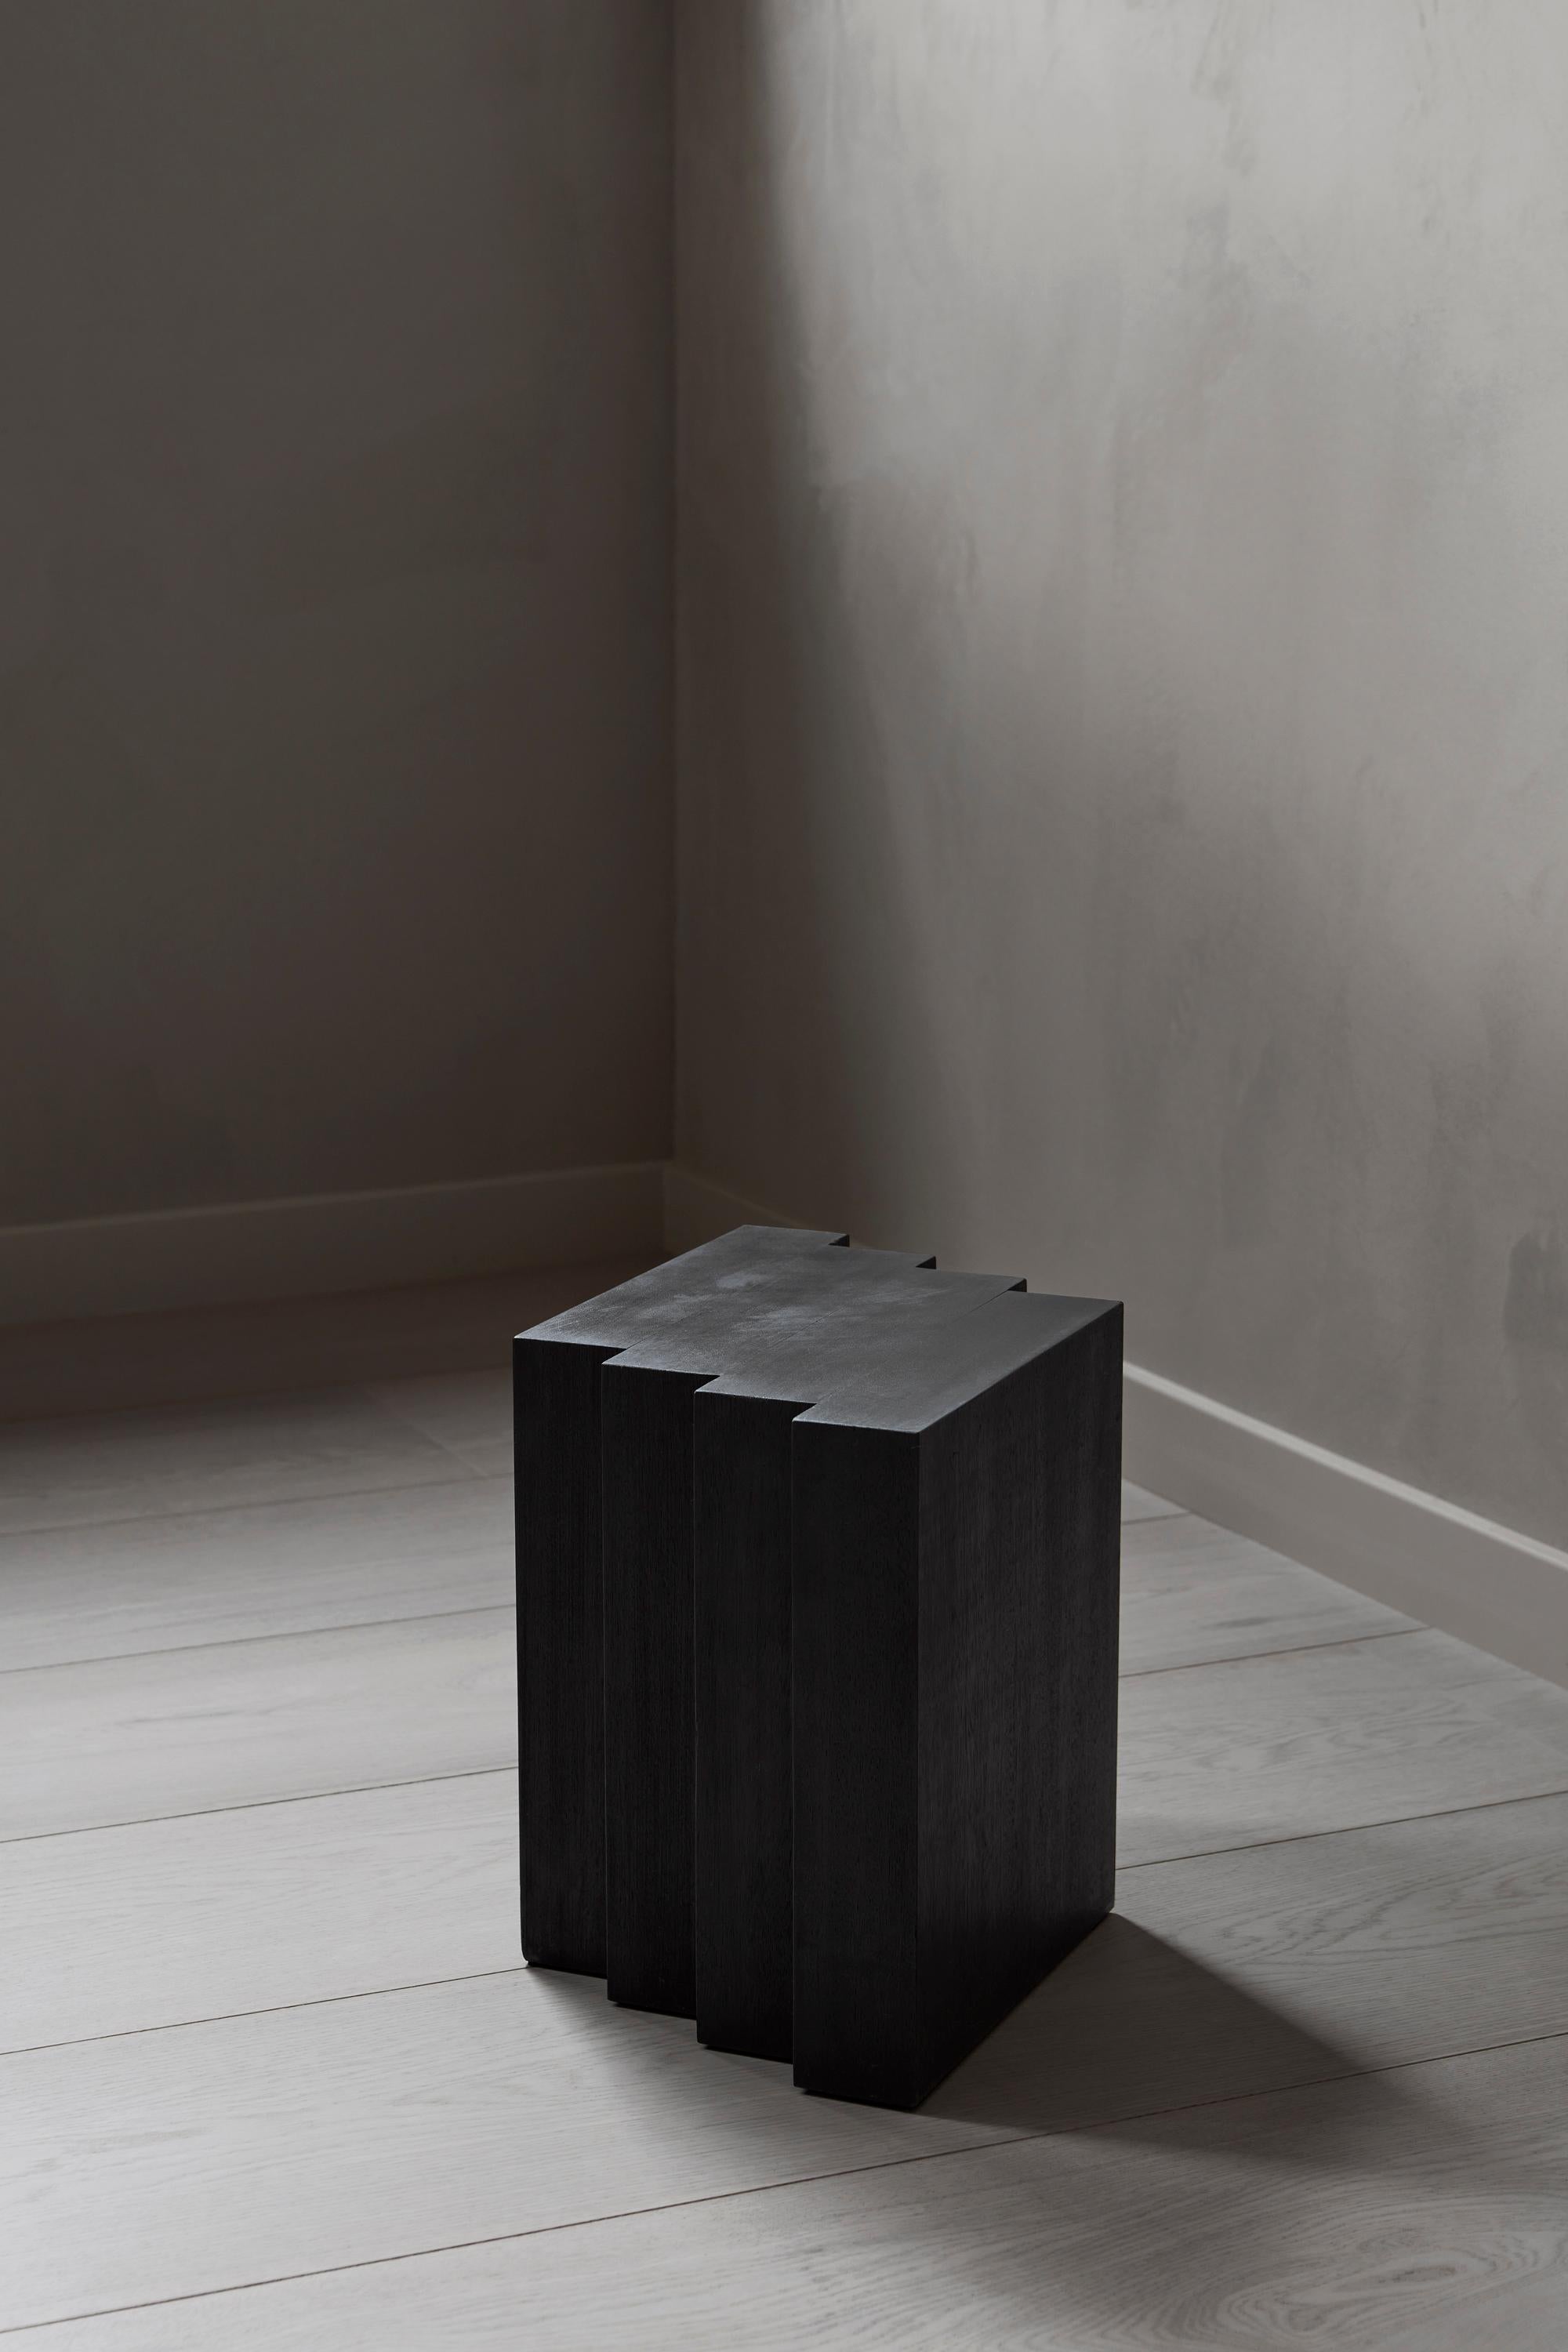 The BEX side tables are inspired by Brick Expressionism, the architectural movement visible in Amsterdam’s ‘South Plan’ area - the city development plan designed by H.P. Berlage in 1915. The objects are designed by Aad Bos and handcrafted in